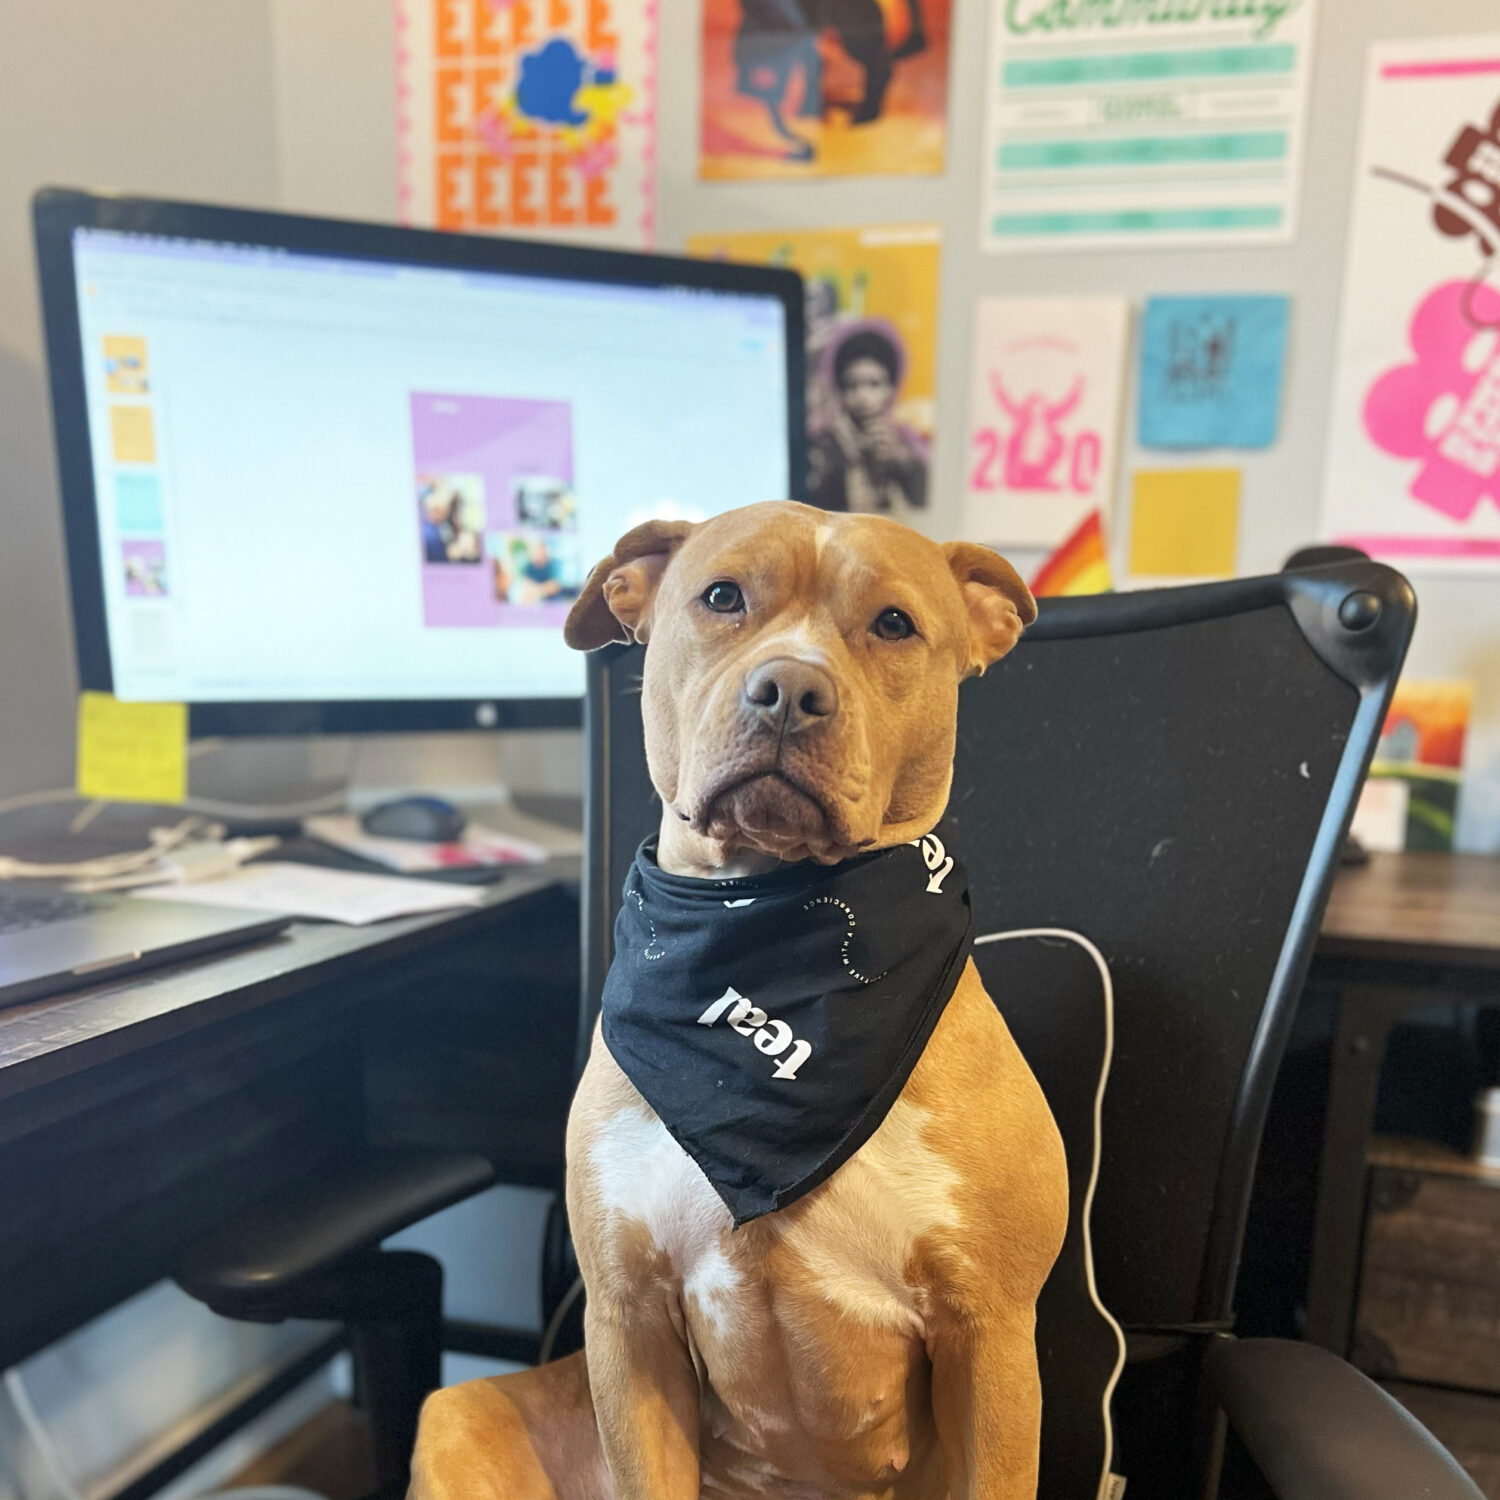 Stevie the dog sitting at a desk, wearing a Teal bandana